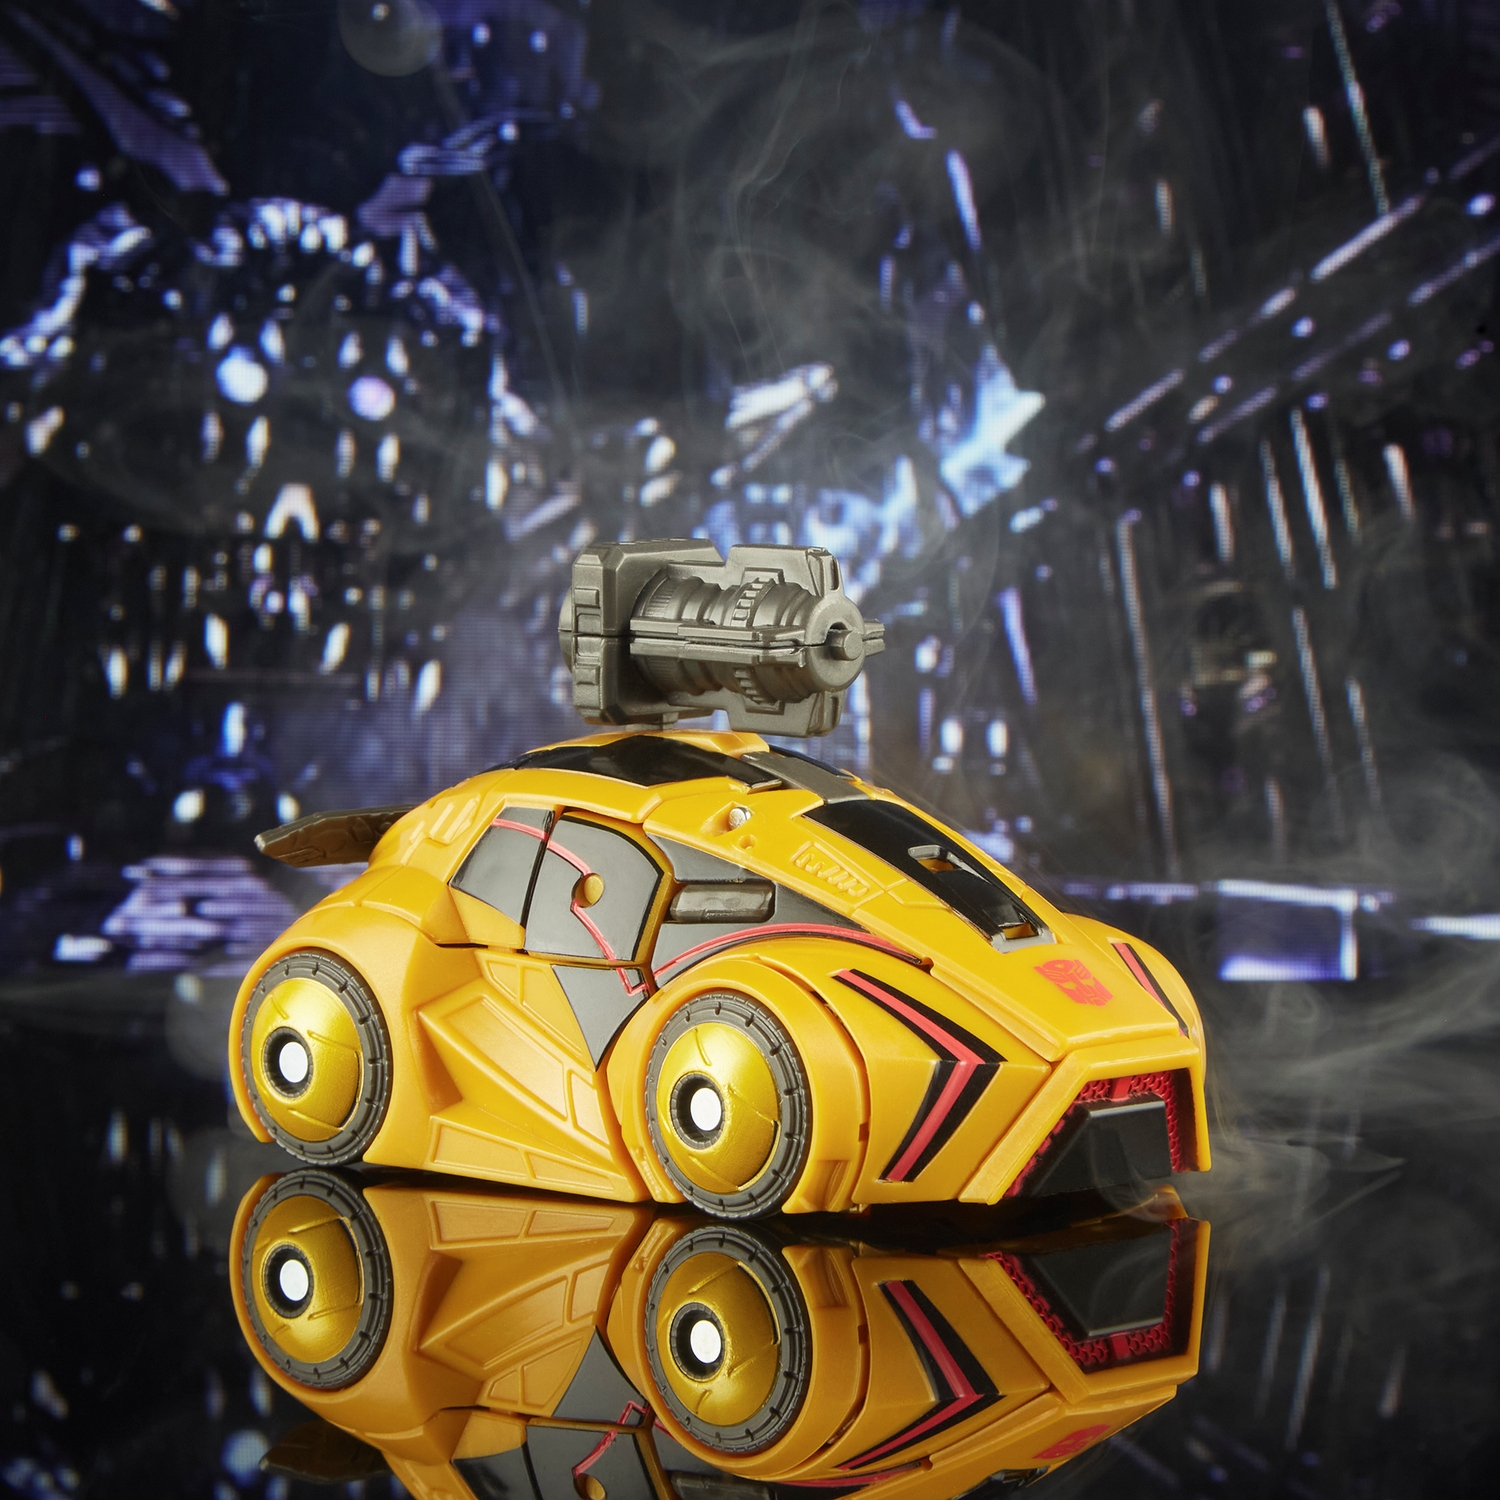 F7235_DIO_TRA_SS_GAMEREDITION_BUMBLEBEE_0004_2000 - Copy.jpg